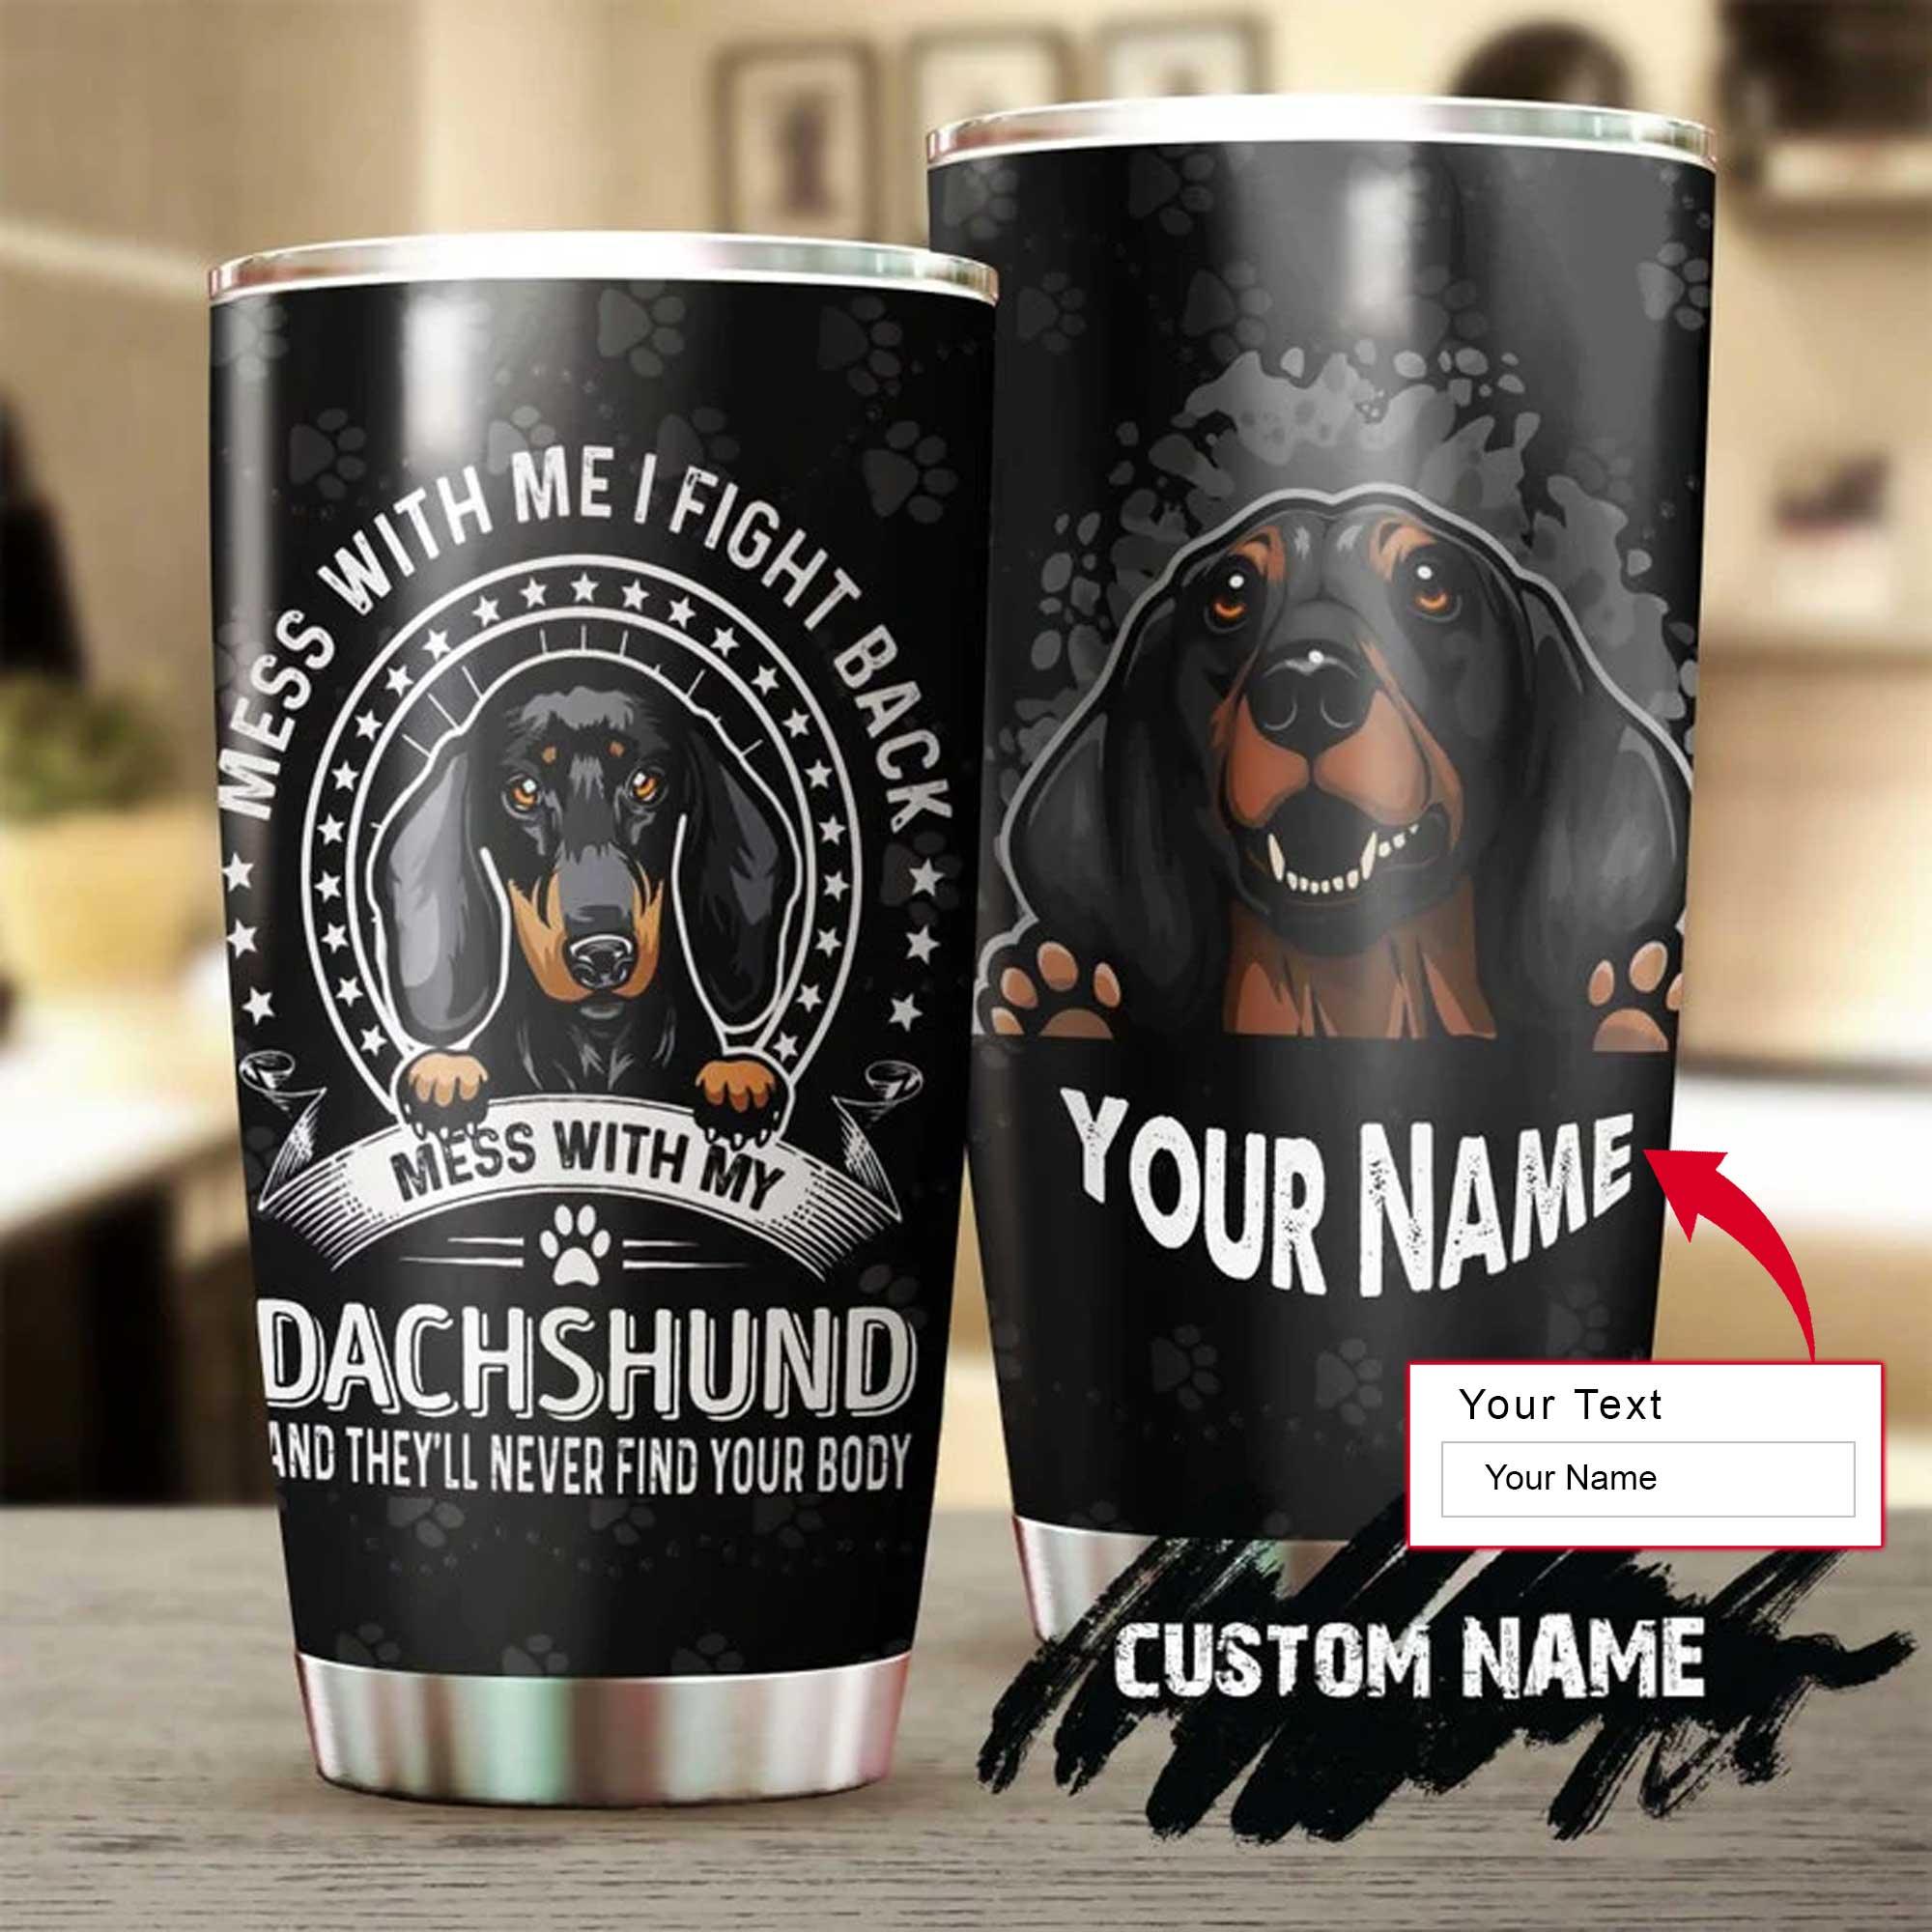 Dachshund Personalized Mother's Day Gift Tumbler - Gift For Dog Lover, Dog Mom, Dog Dad, Dog Lady - Mess With My Dachshund Tumbler - Amzanimalsgift